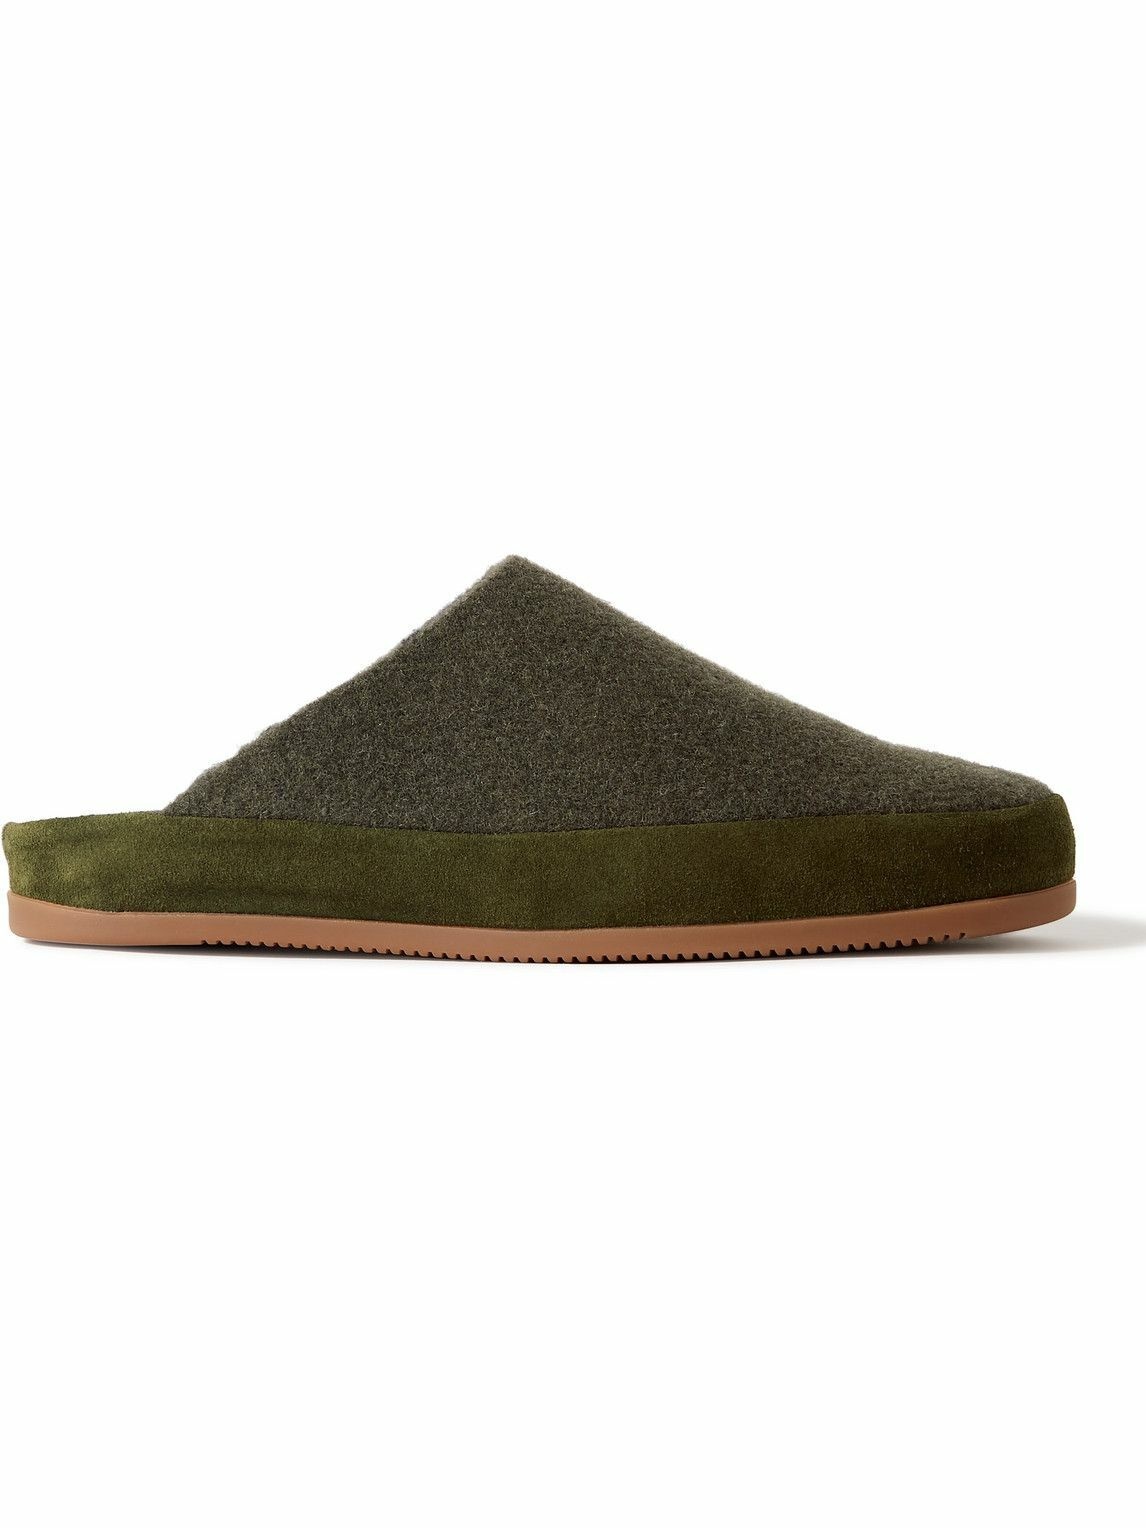 Photo: Mulo - Suede-Trimmed Shearling-Lined Recycled-Wool Slippers - Green